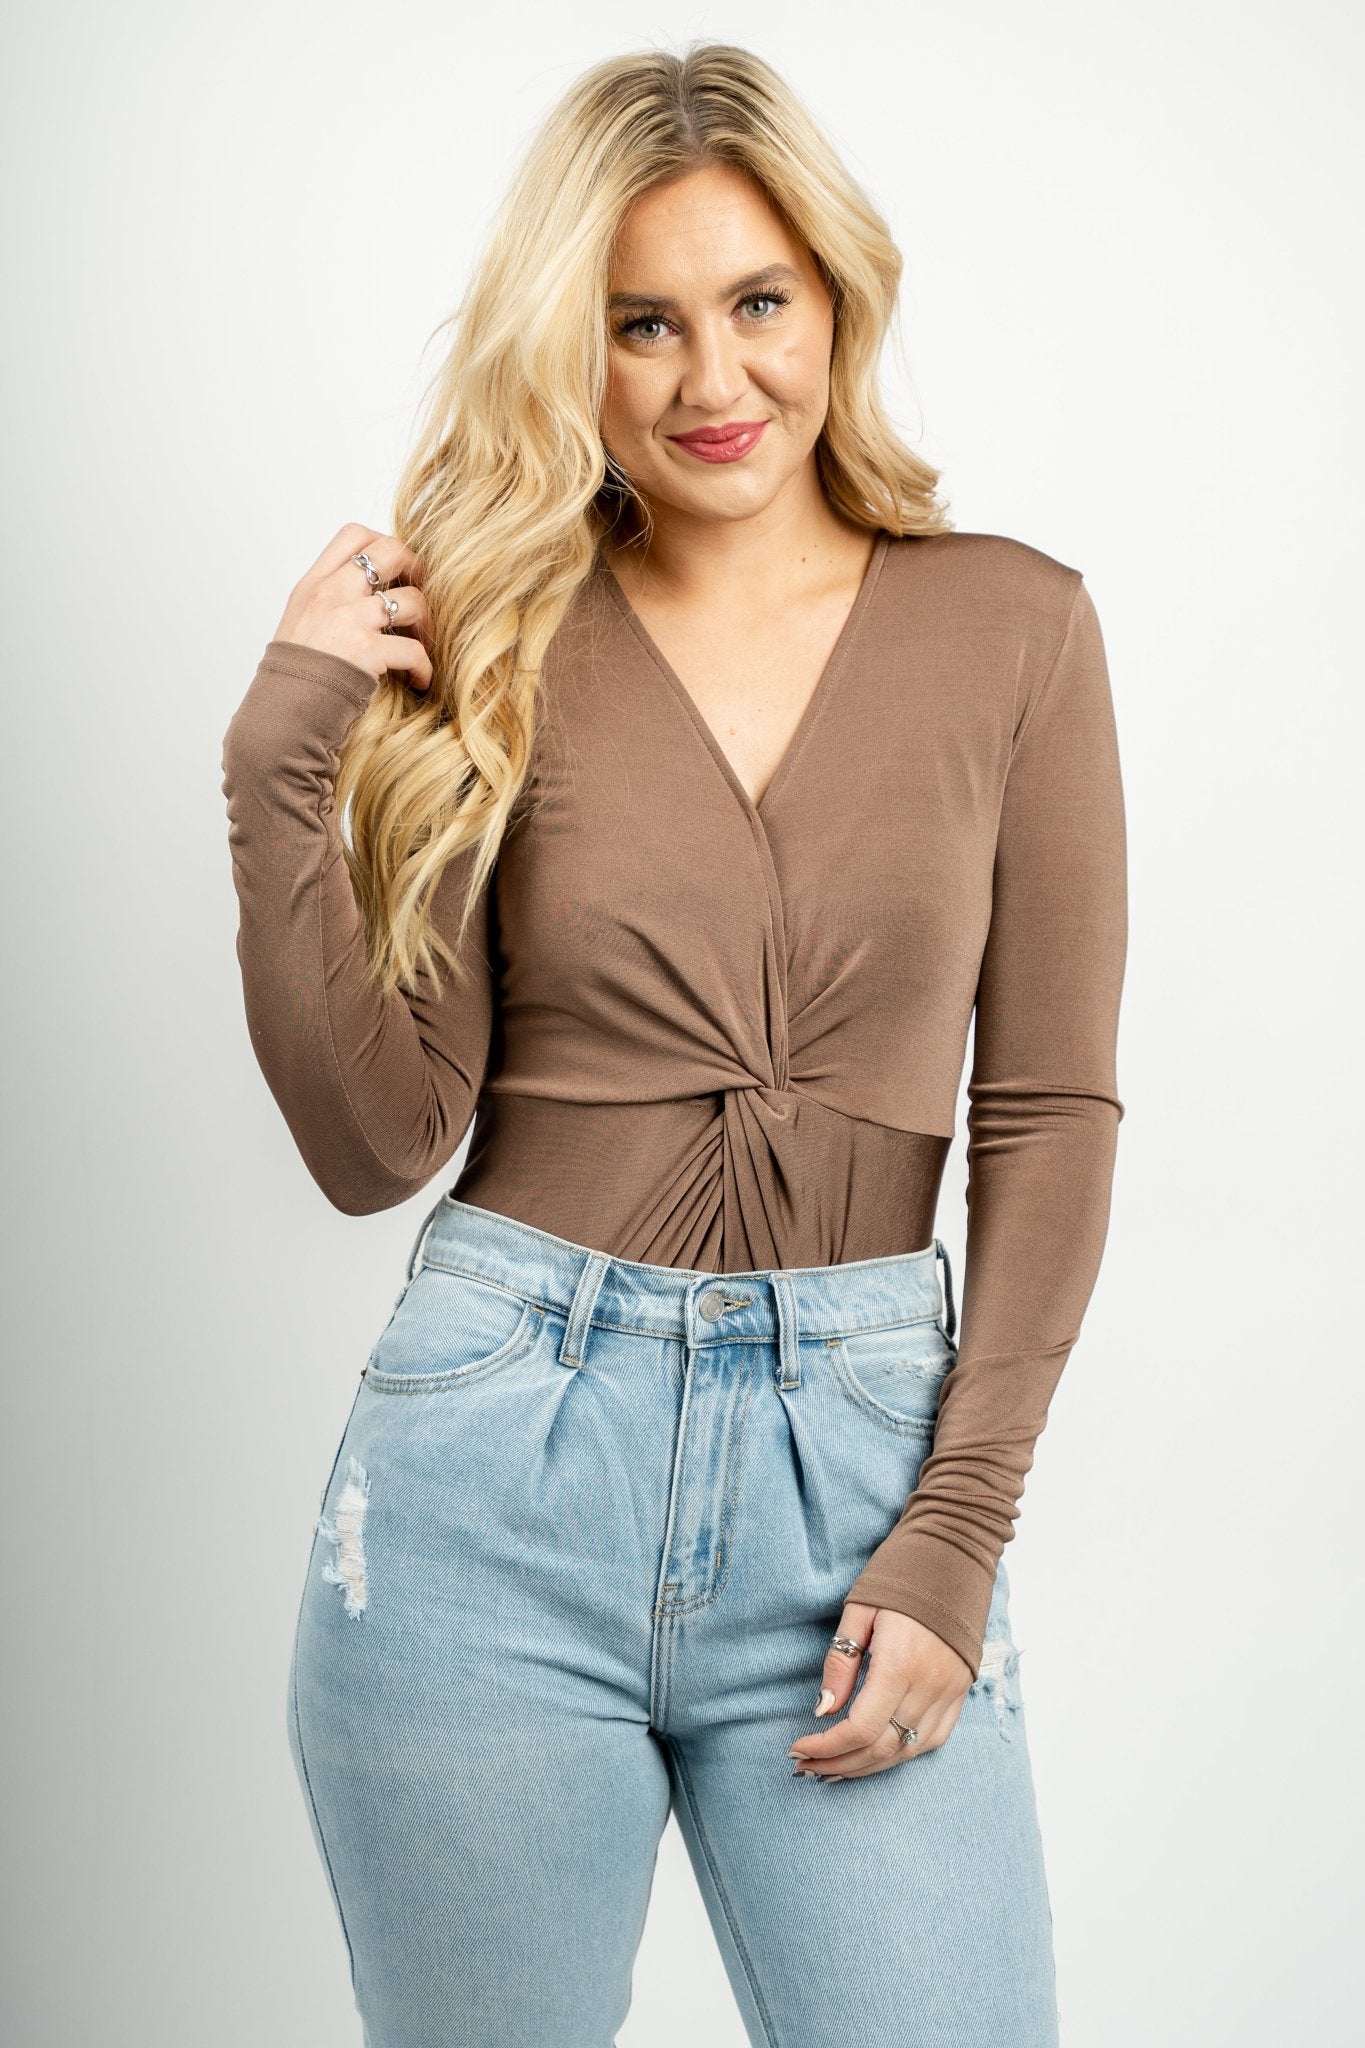 Knot front long sleeve bodysuit mocha - Affordable bodysuit - Boutique Bodysuits at Lush Fashion Lounge Boutique in Oklahoma City